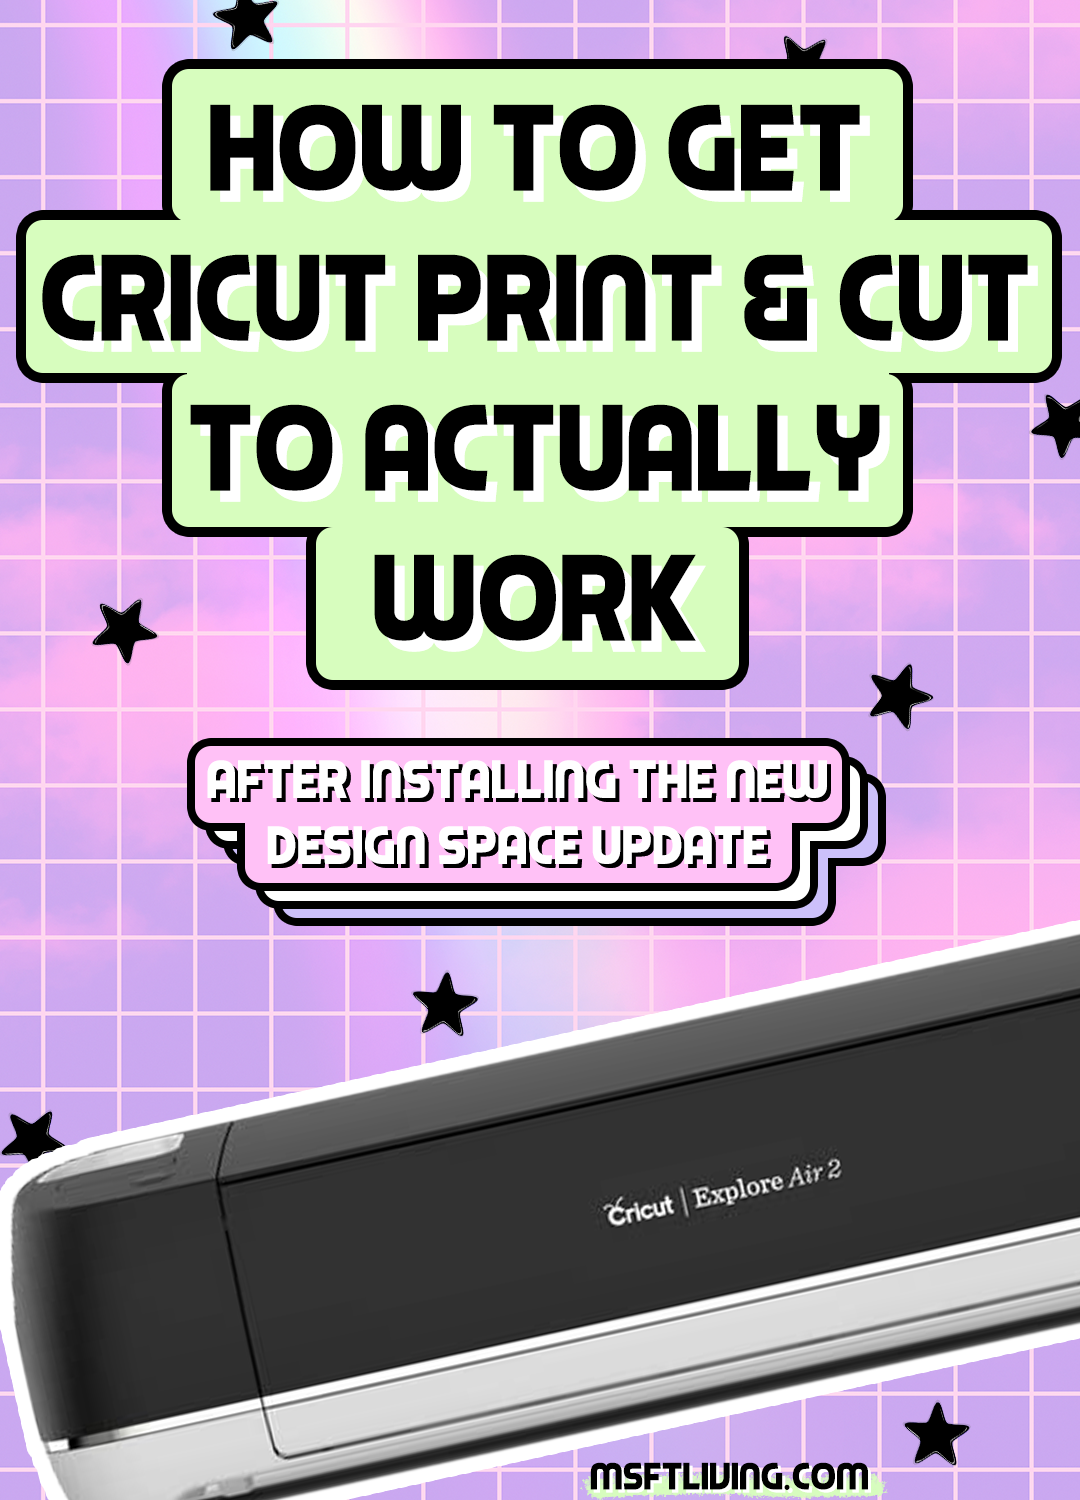 HOW TO MAKE CRICUT PRINT AND CUT ACTUALLY WORK (POST2021 DESIGN SPACE